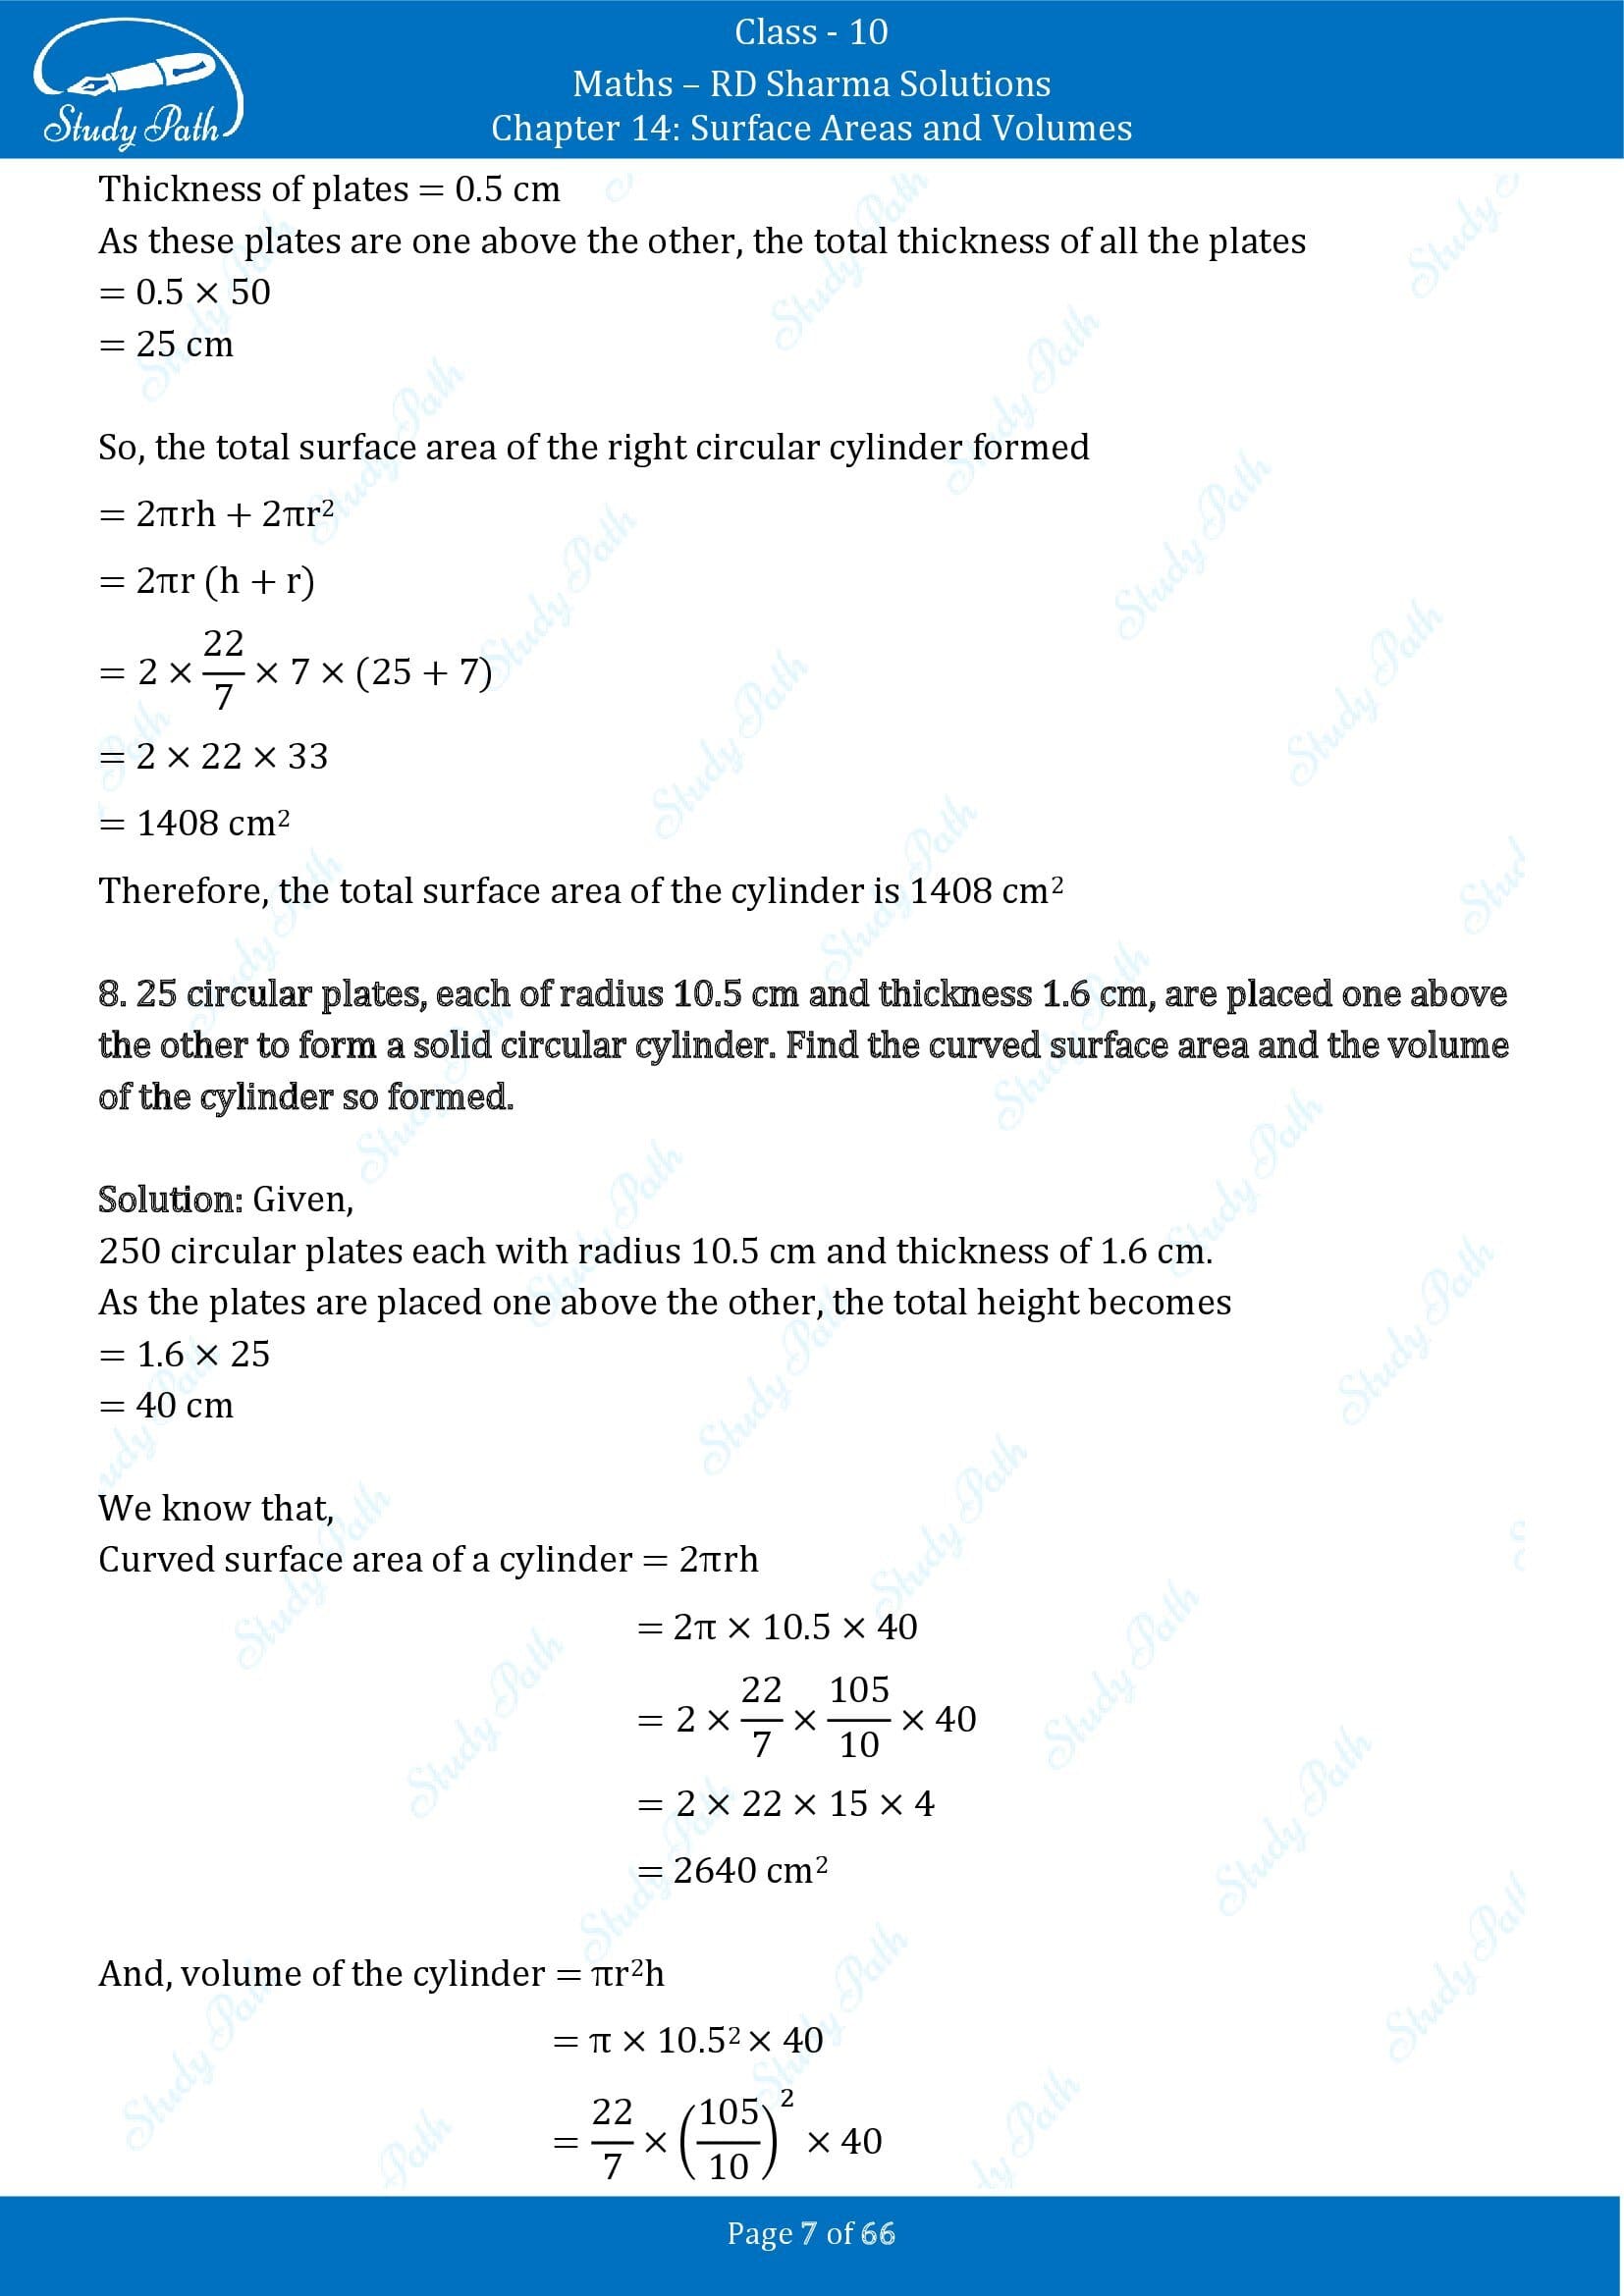 RD Sharma Solutions Class 10 Chapter 14 Surface Areas and Volumes Exercise 14.1 00007